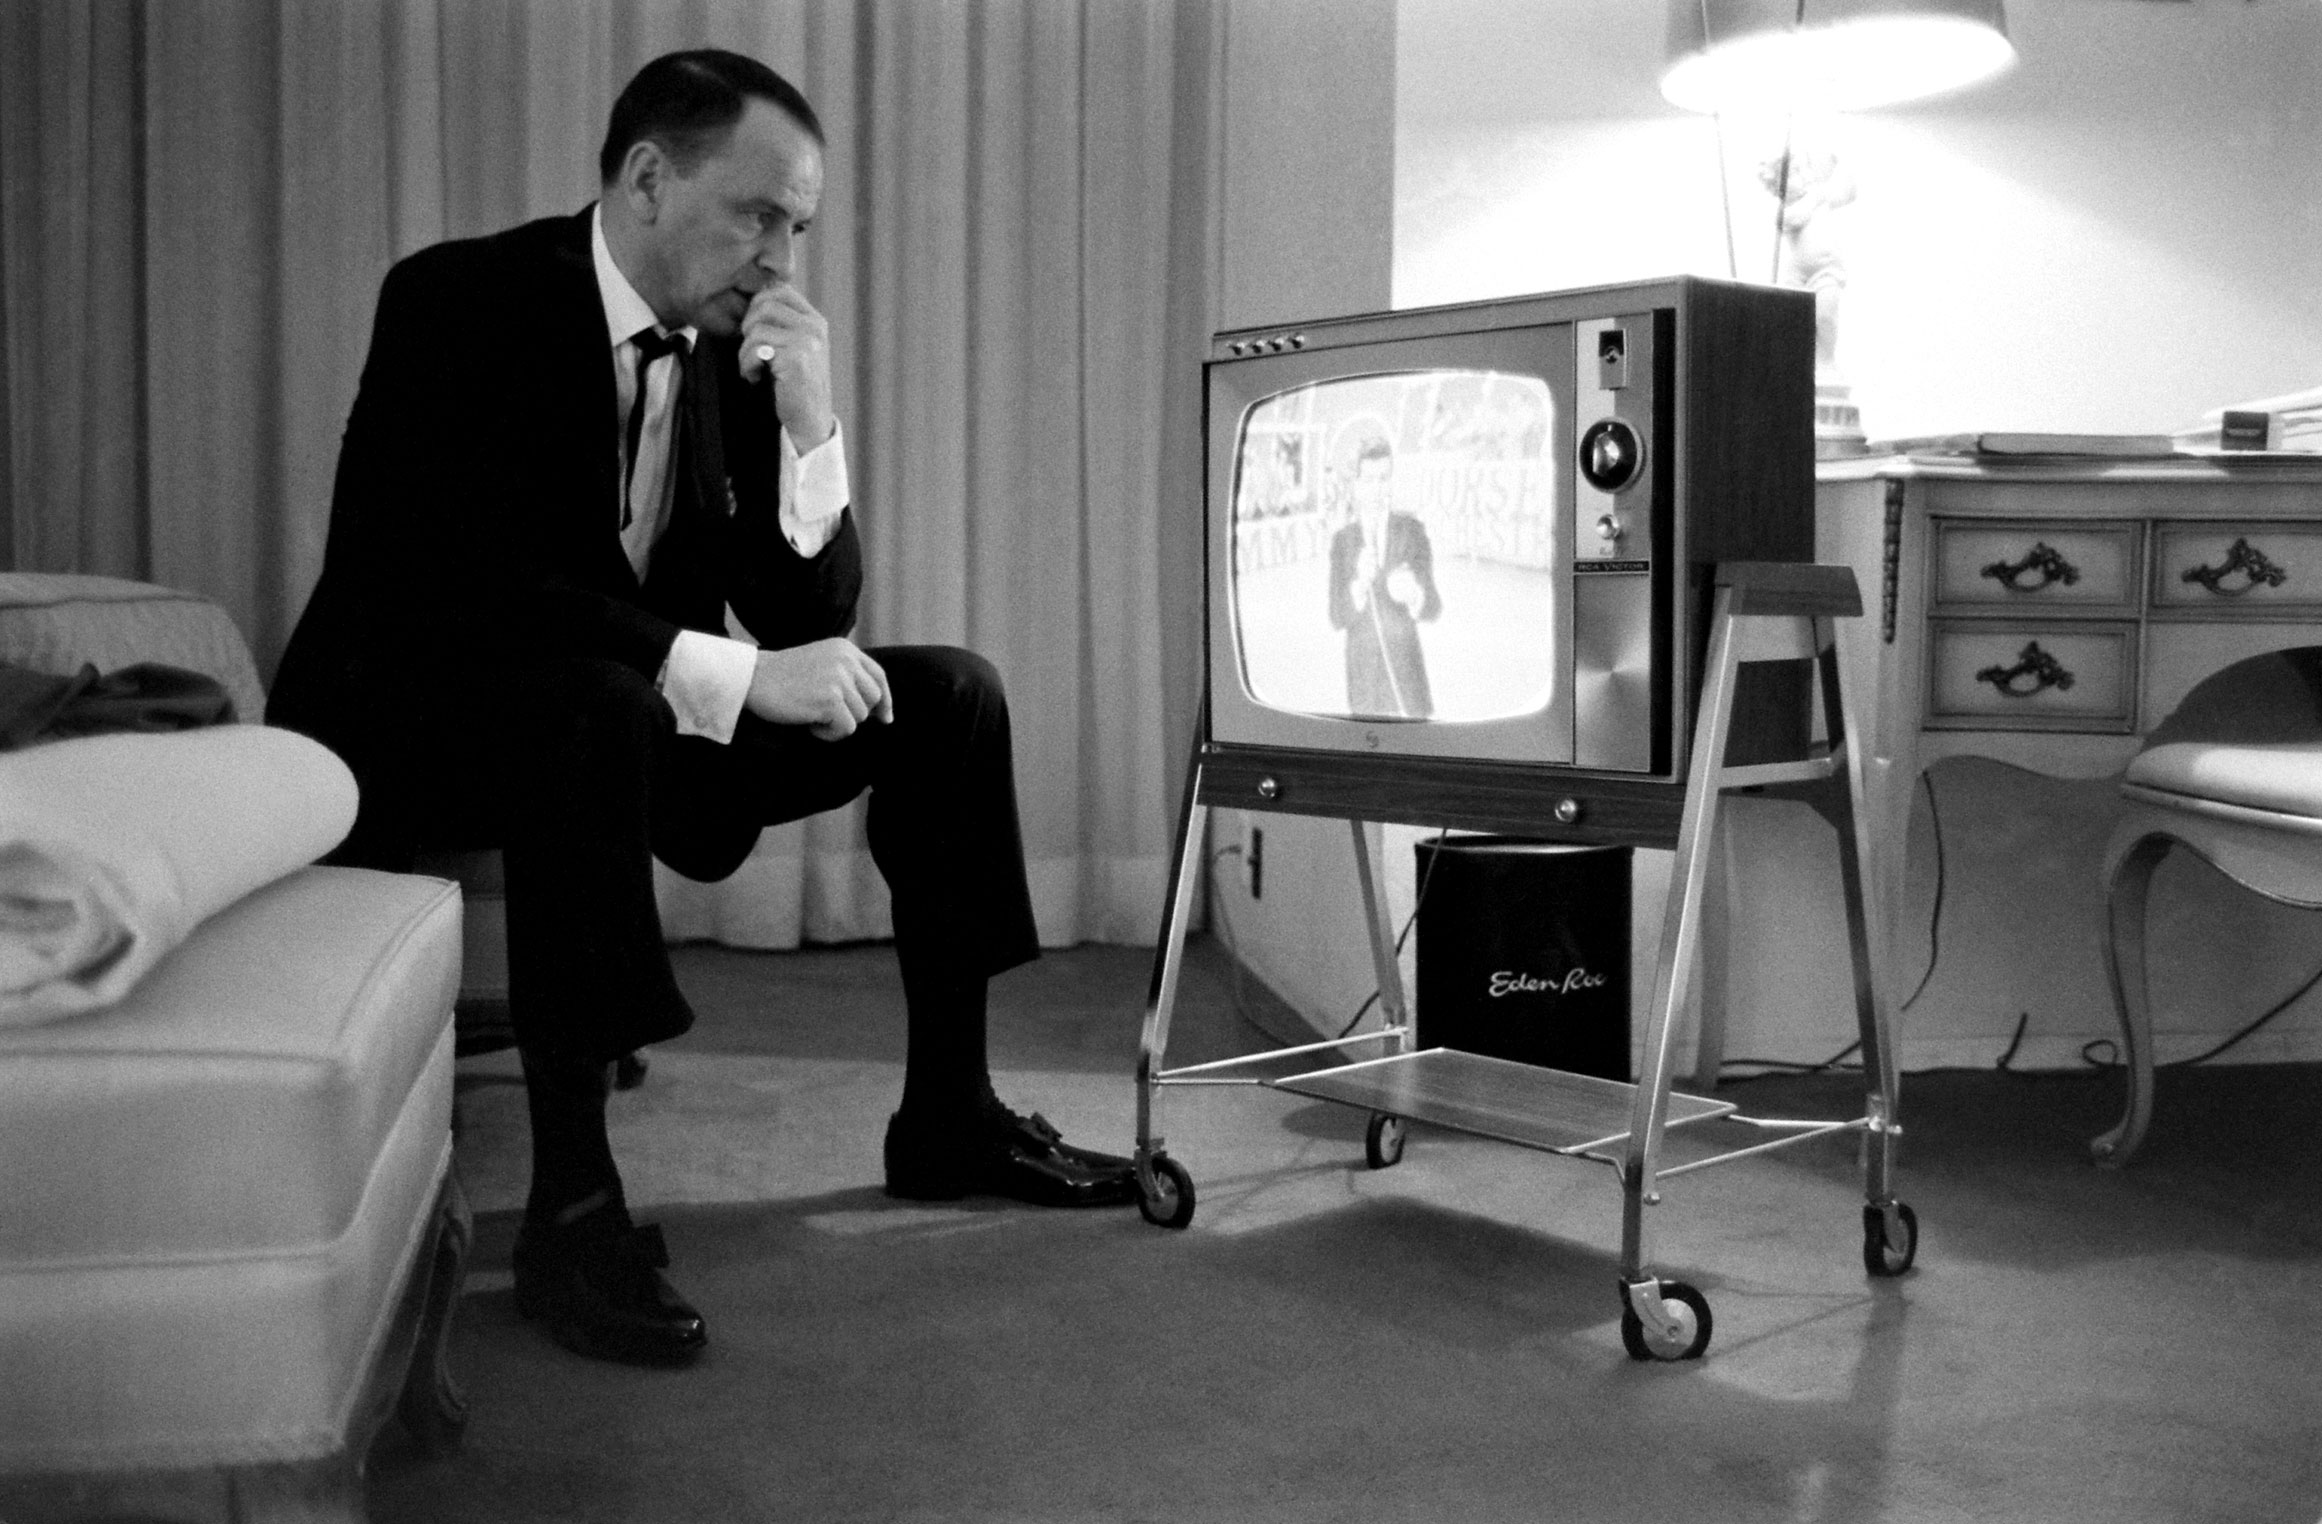 Frank Sinatra watches his son on television, 1965